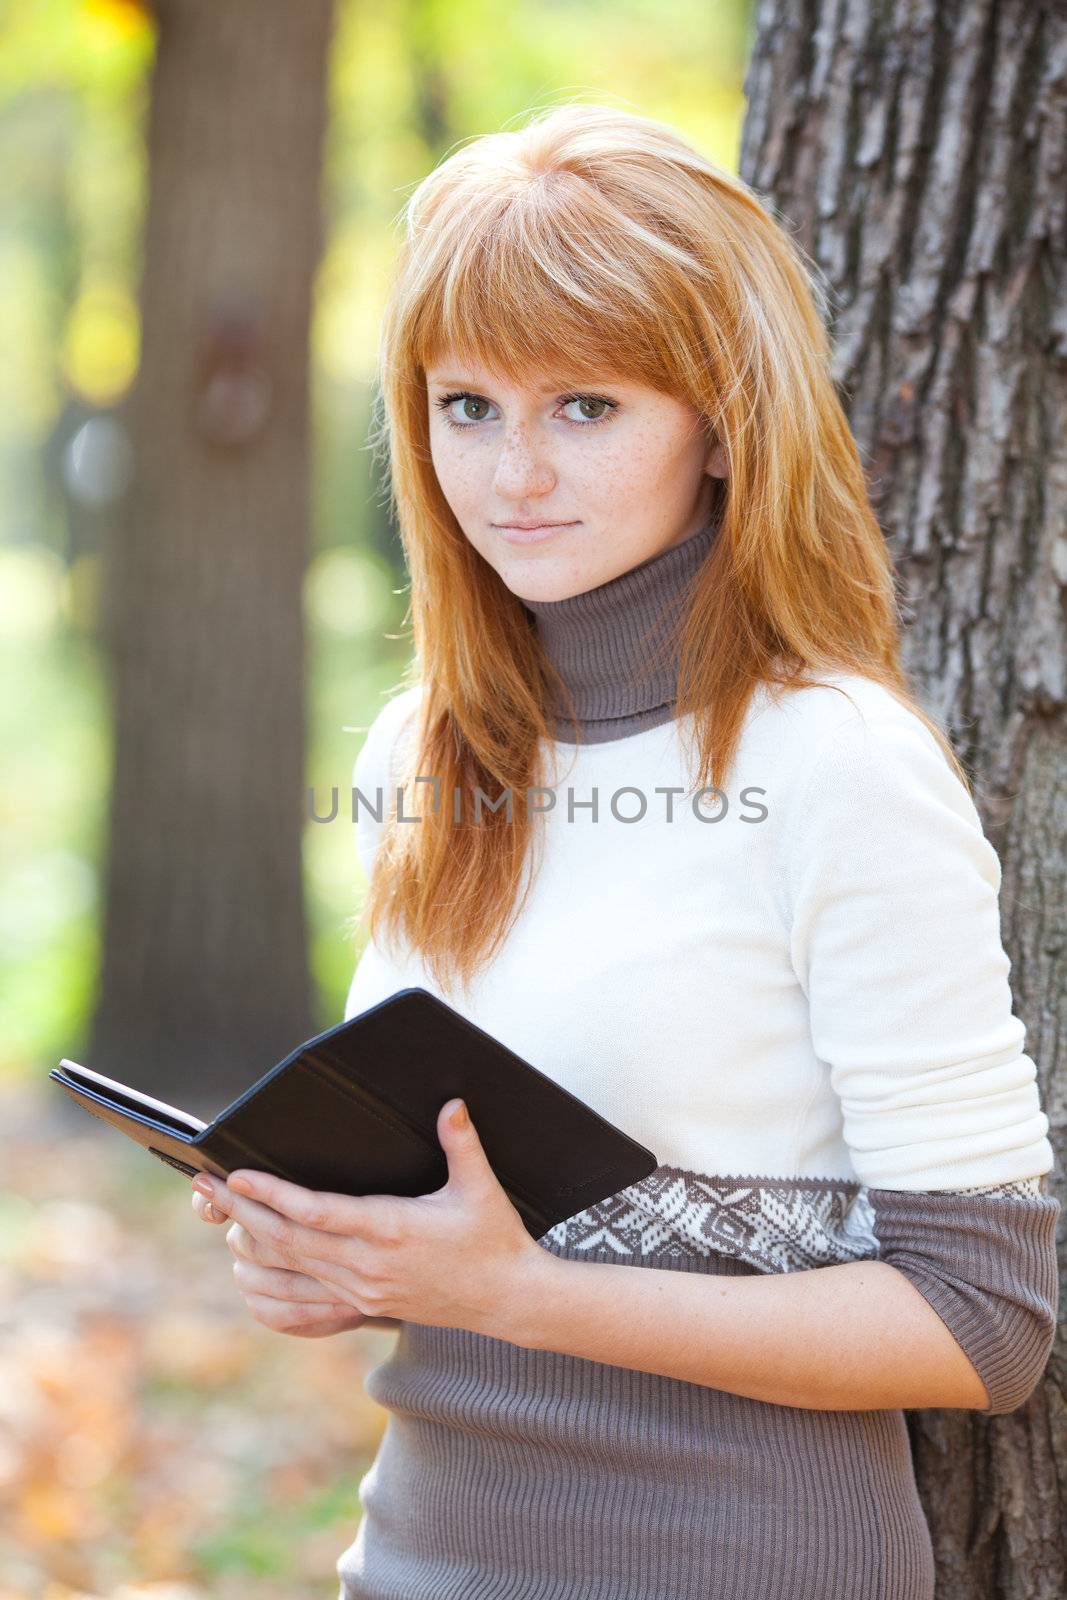 portrait of a beautiful young redhead teenager woman reading a book